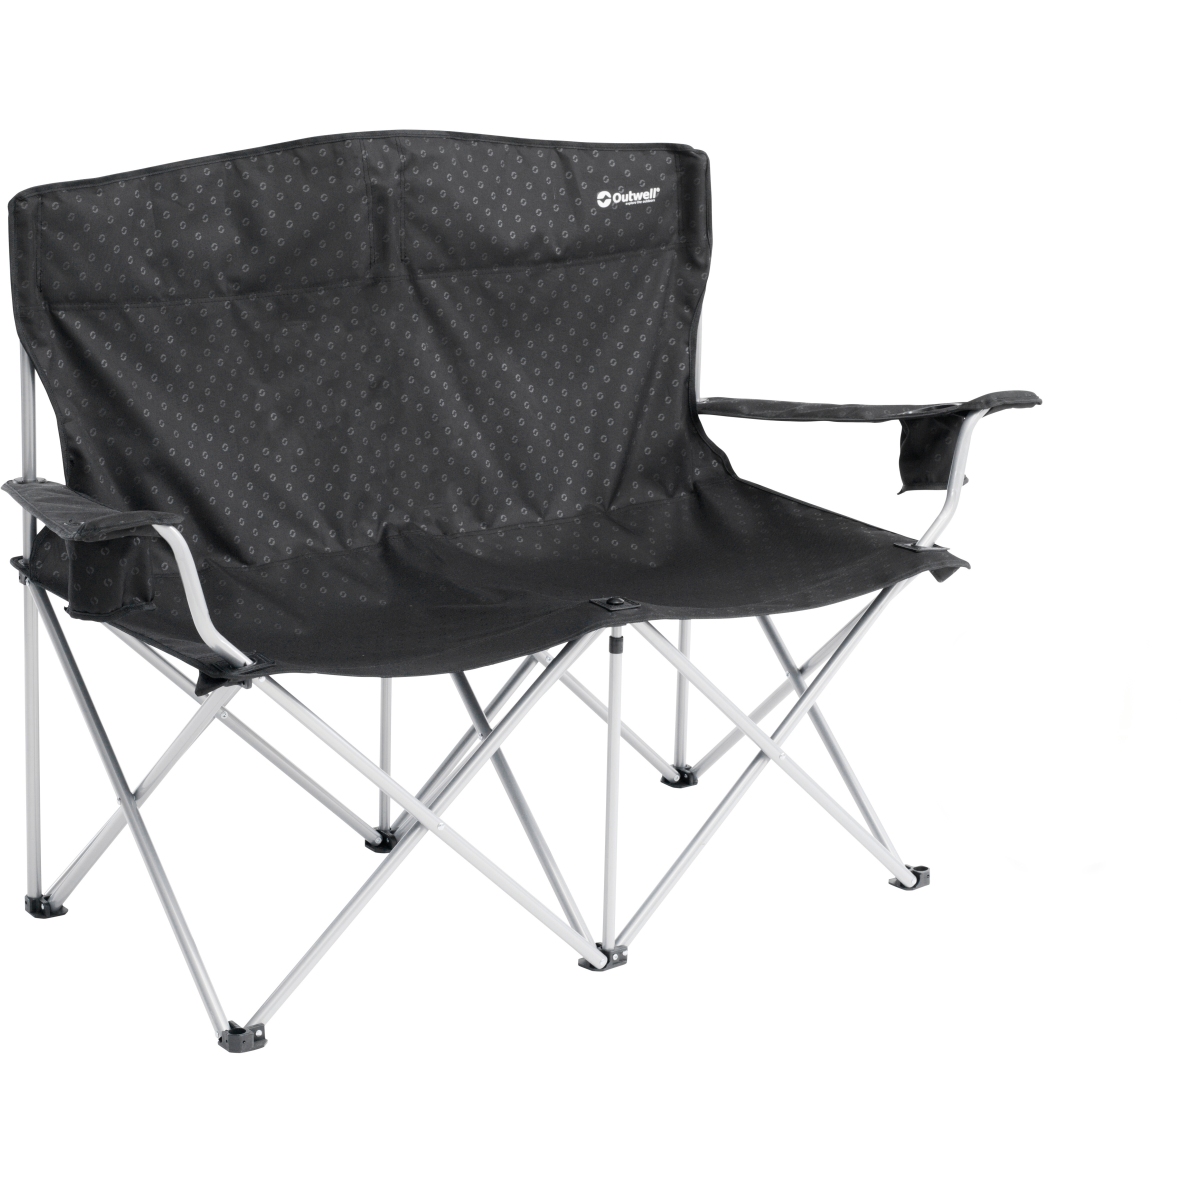 Image of Outwell Catamarca Sofa Double Camping Chair - Black